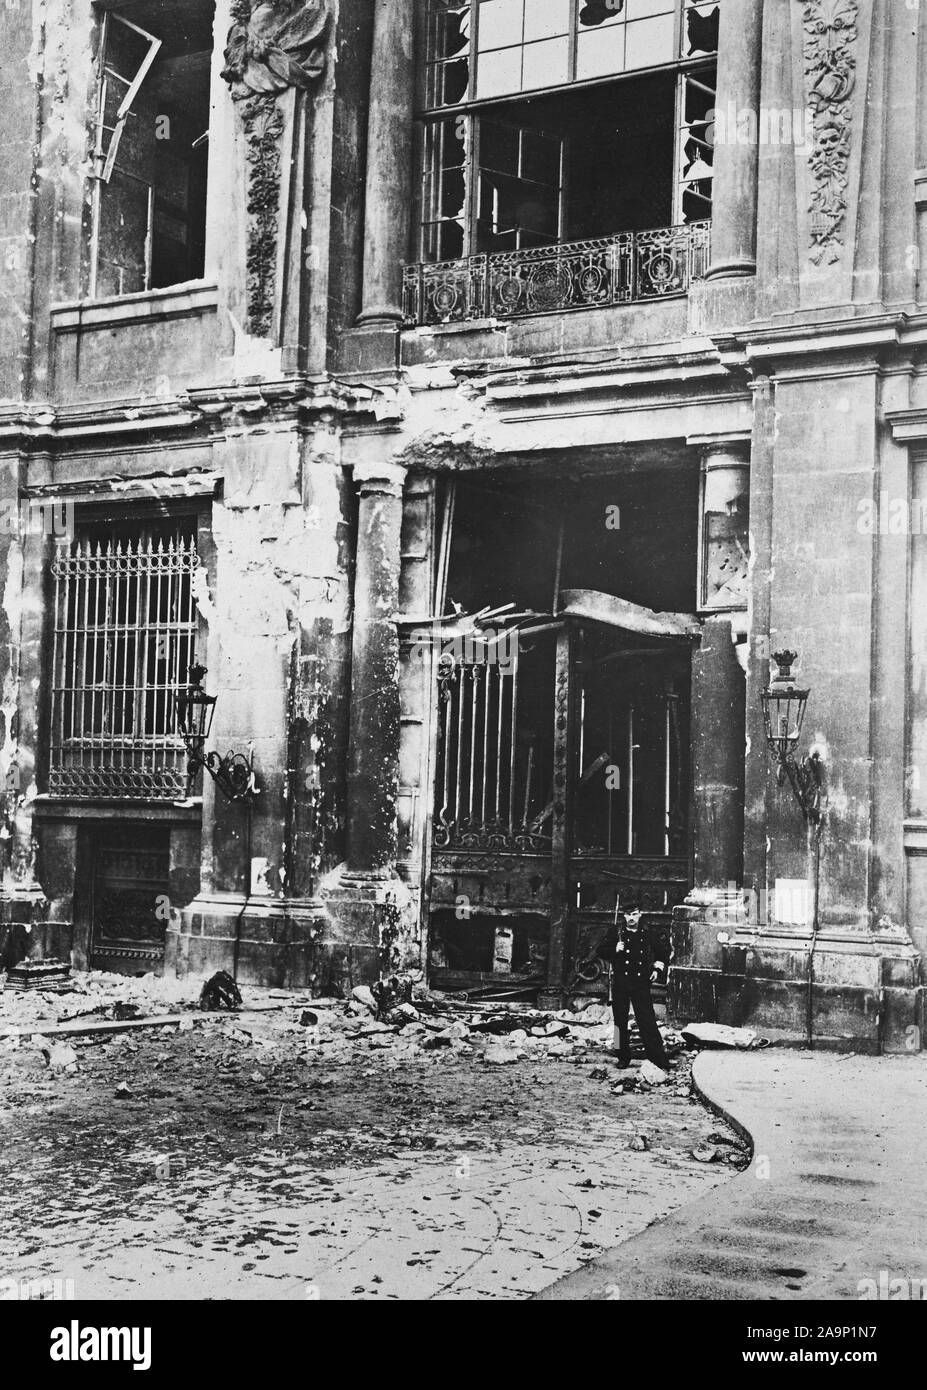 German Revolution - Disturbances in Potsdam, Germany. Entrance to Imperial Palace in Potsdam wrecked by Spartacans ca. 1918-1919 Stock Photo